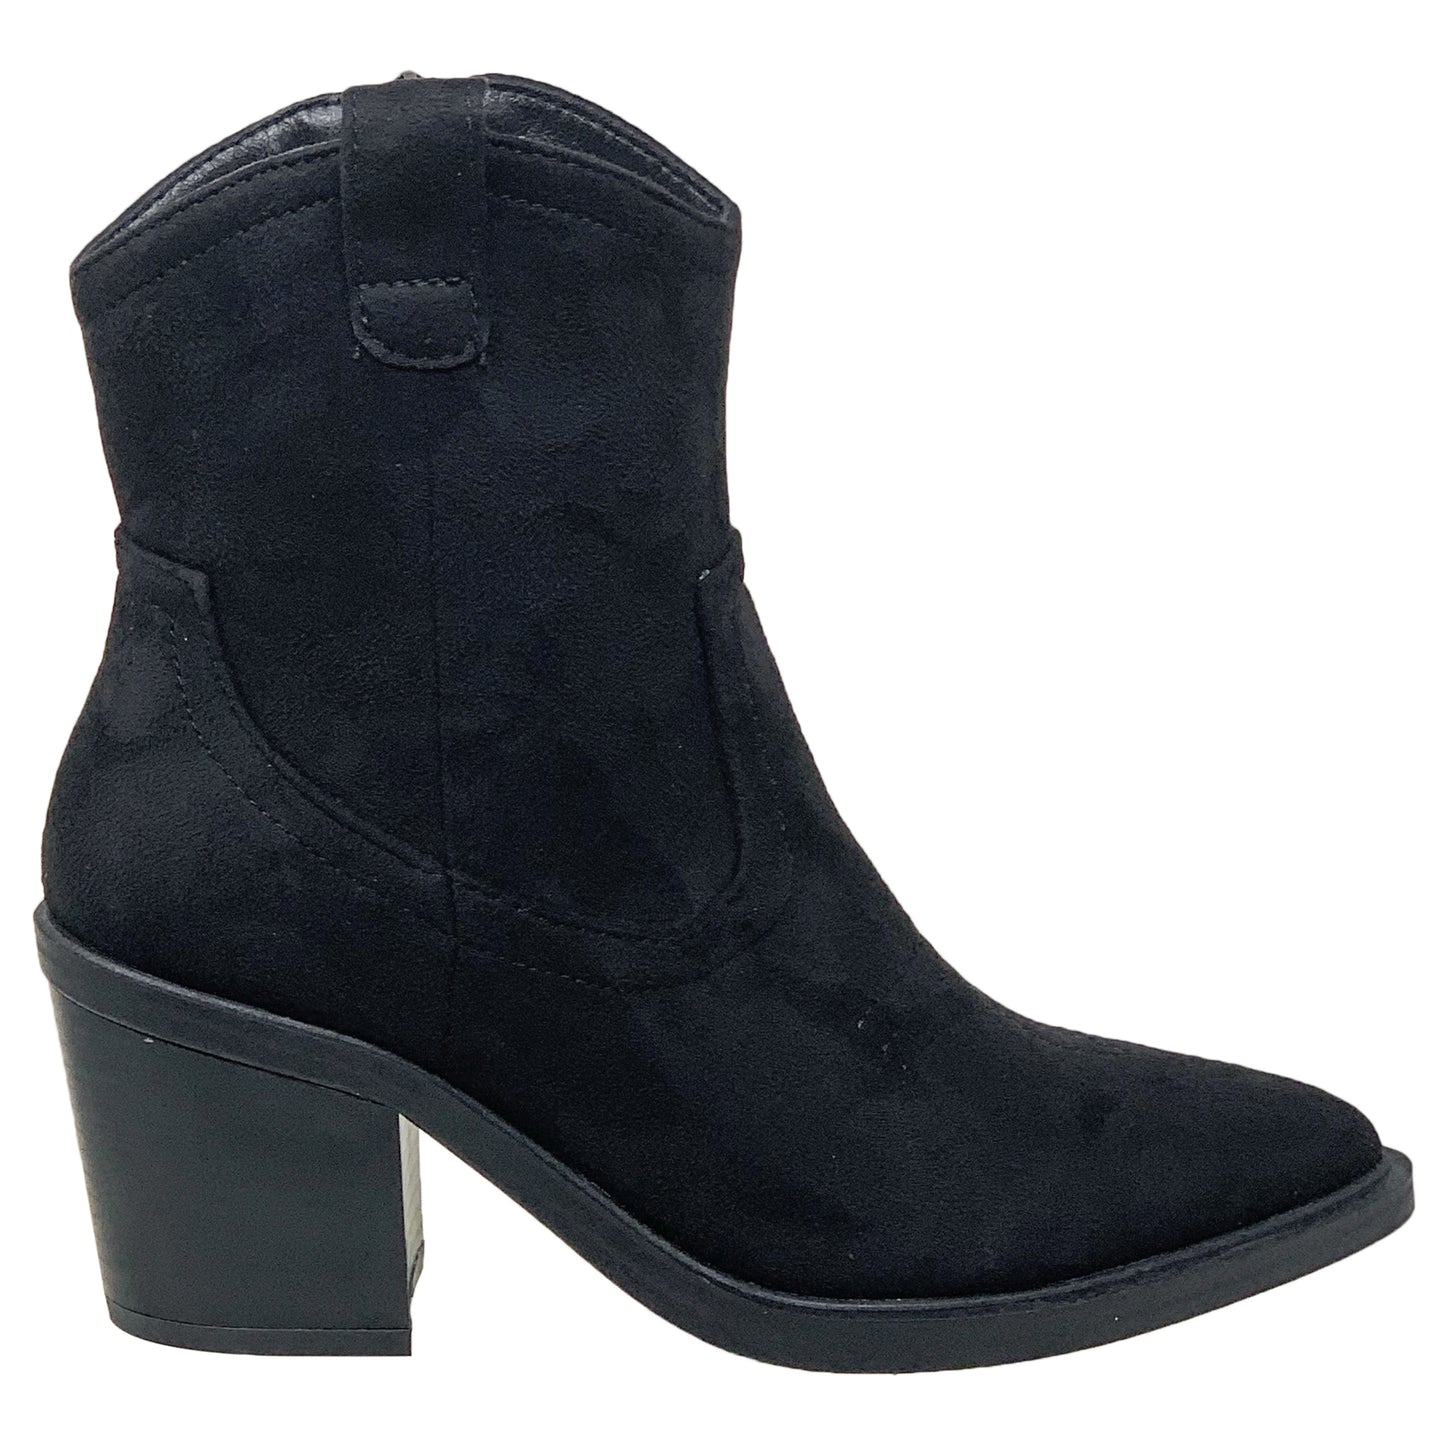 Western Ankle Booties Stitched Cowboy Toe Side Zipper Closure Black